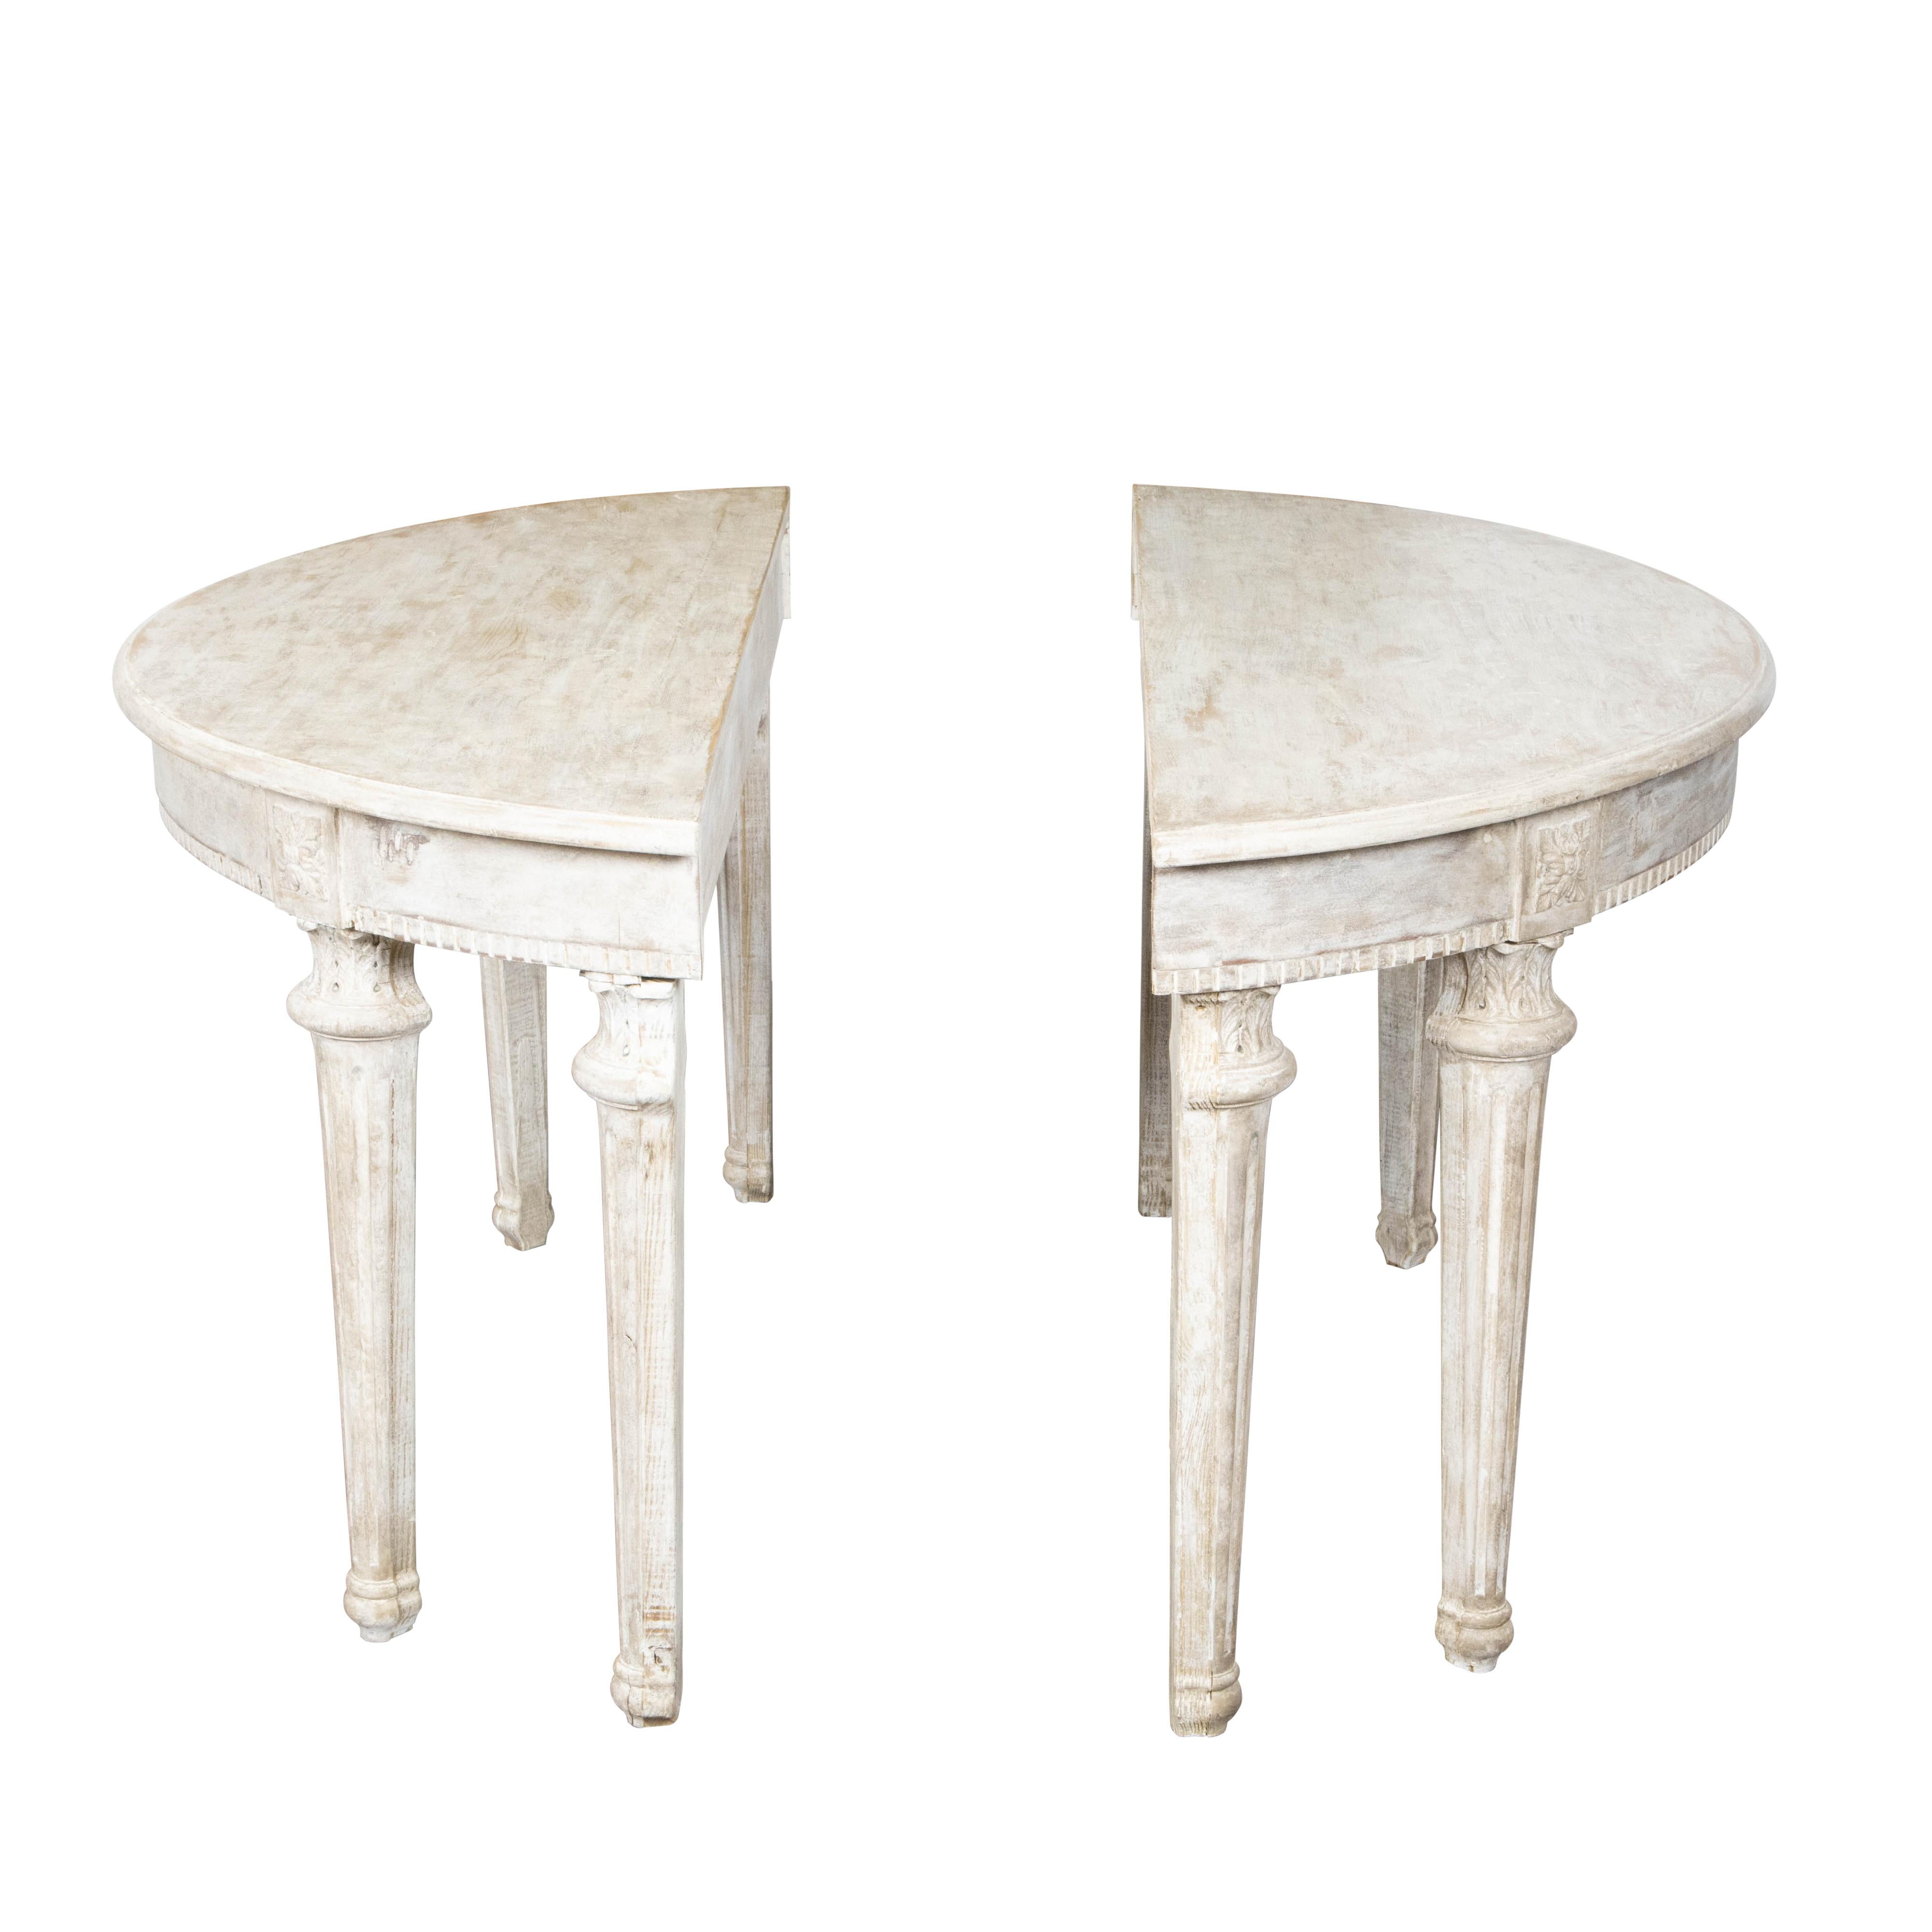 Pair of French Neoclassical Style 1880s Demilune Tables with Carved Décor In Good Condition For Sale In Atlanta, GA